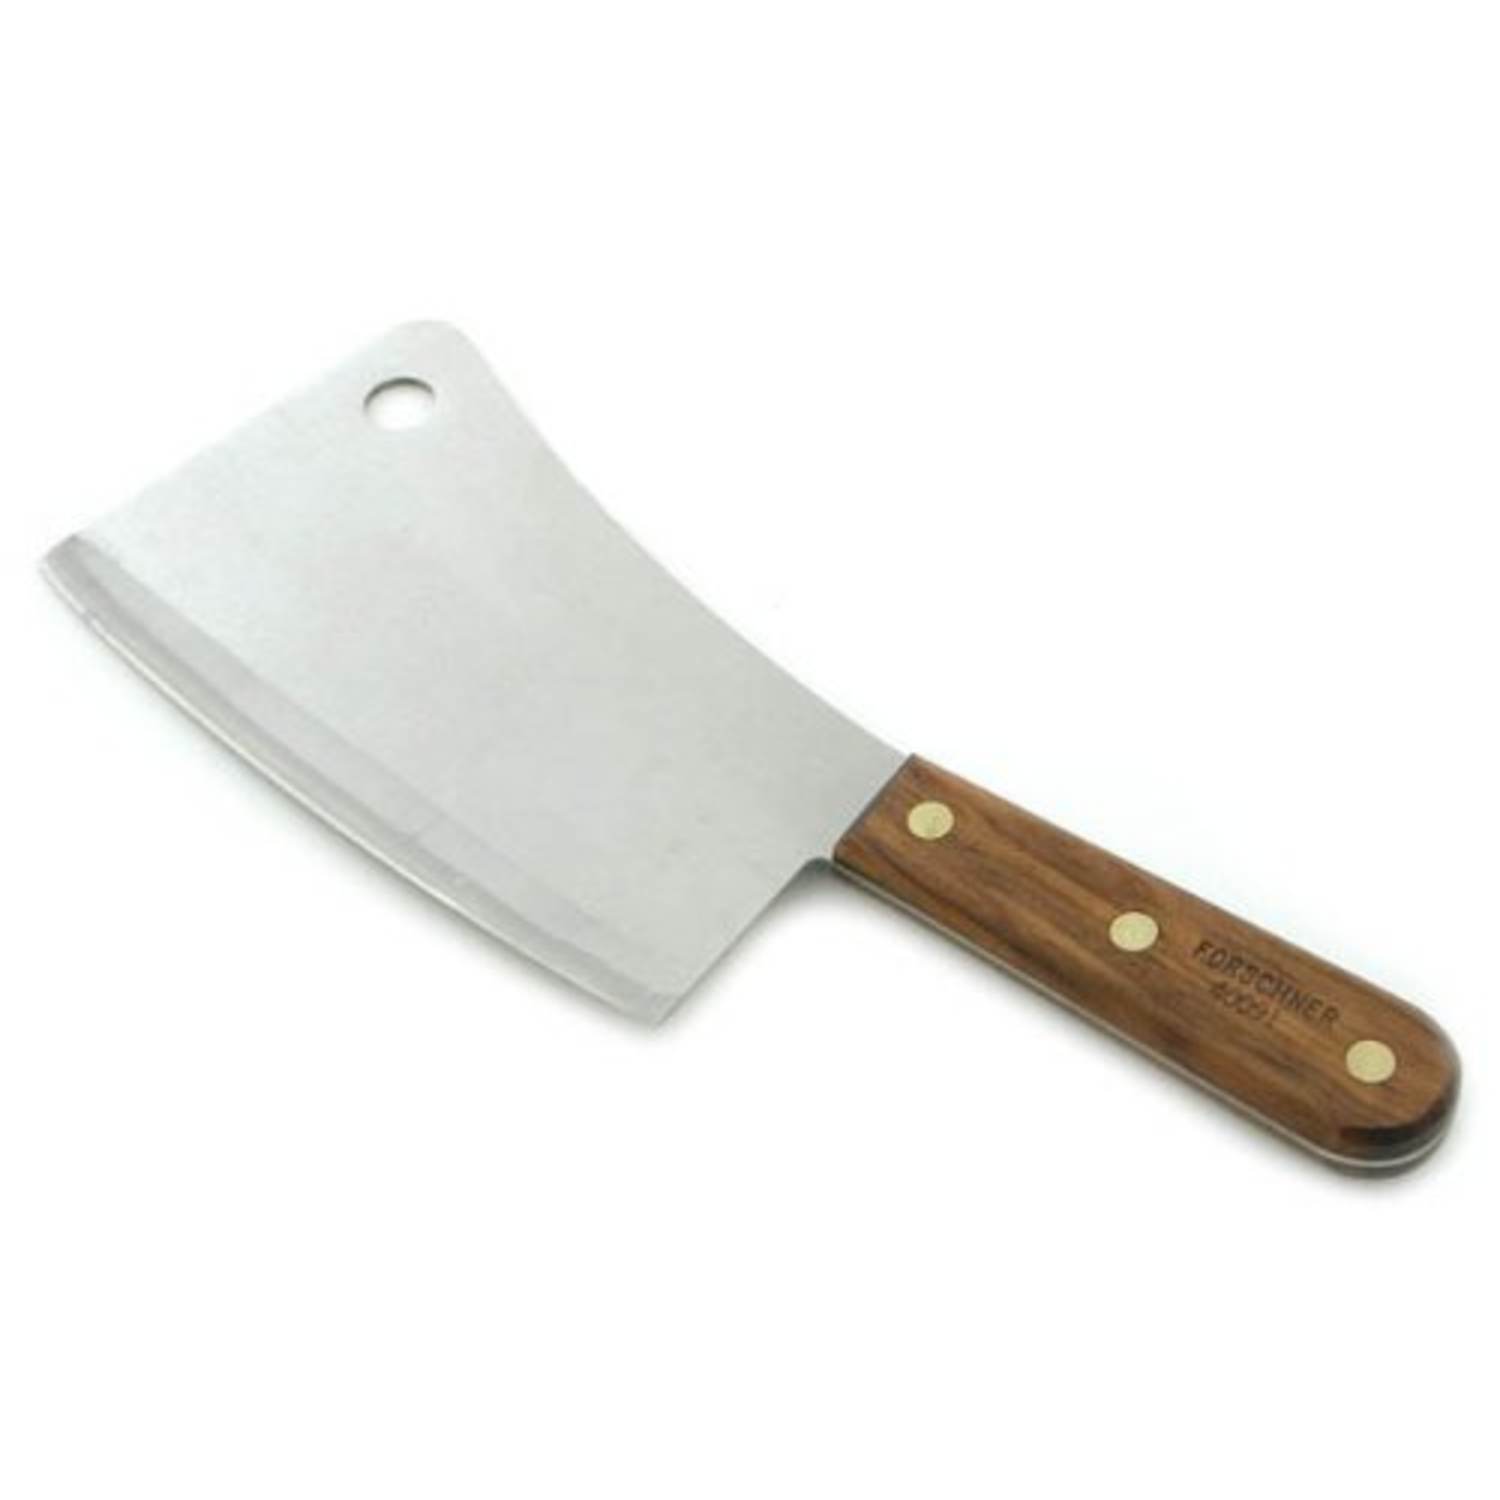 Victorinox 7.6059.8 Chinese Cleaver 8 x 3 Curved Walnut Handle